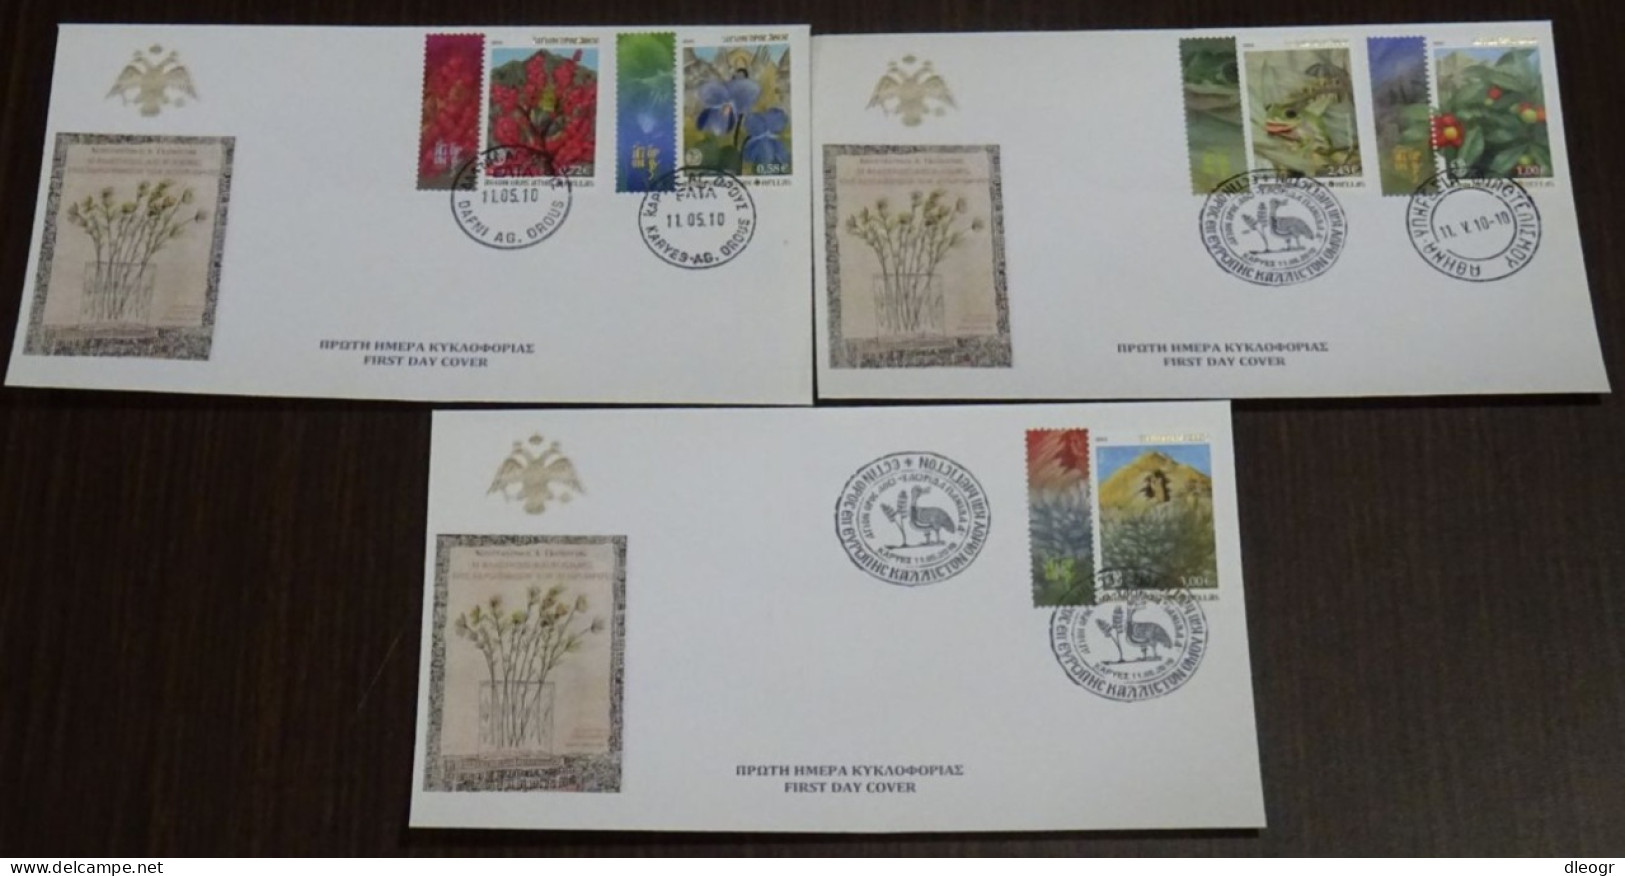 Greece Mount Athos 2010 Flora-Fauna I Unofficial FDC - FDC